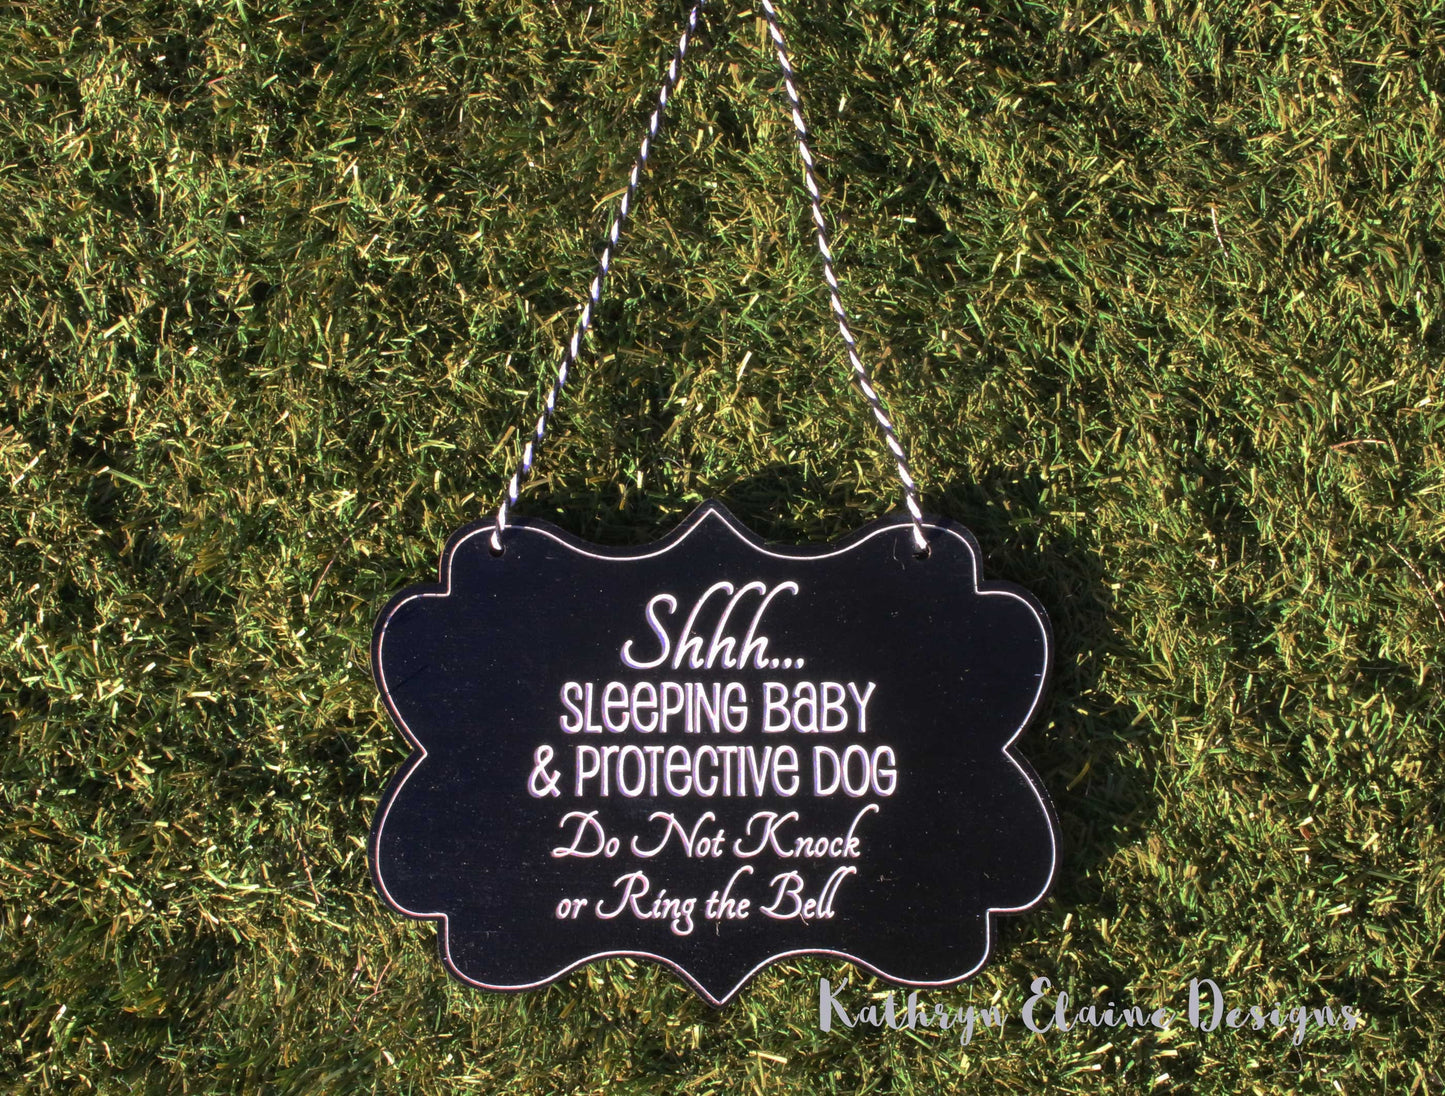 Baby Sleeping & Protective Dog, Please do not knock or ring the bell Laser Engraved Wooden Door Sign